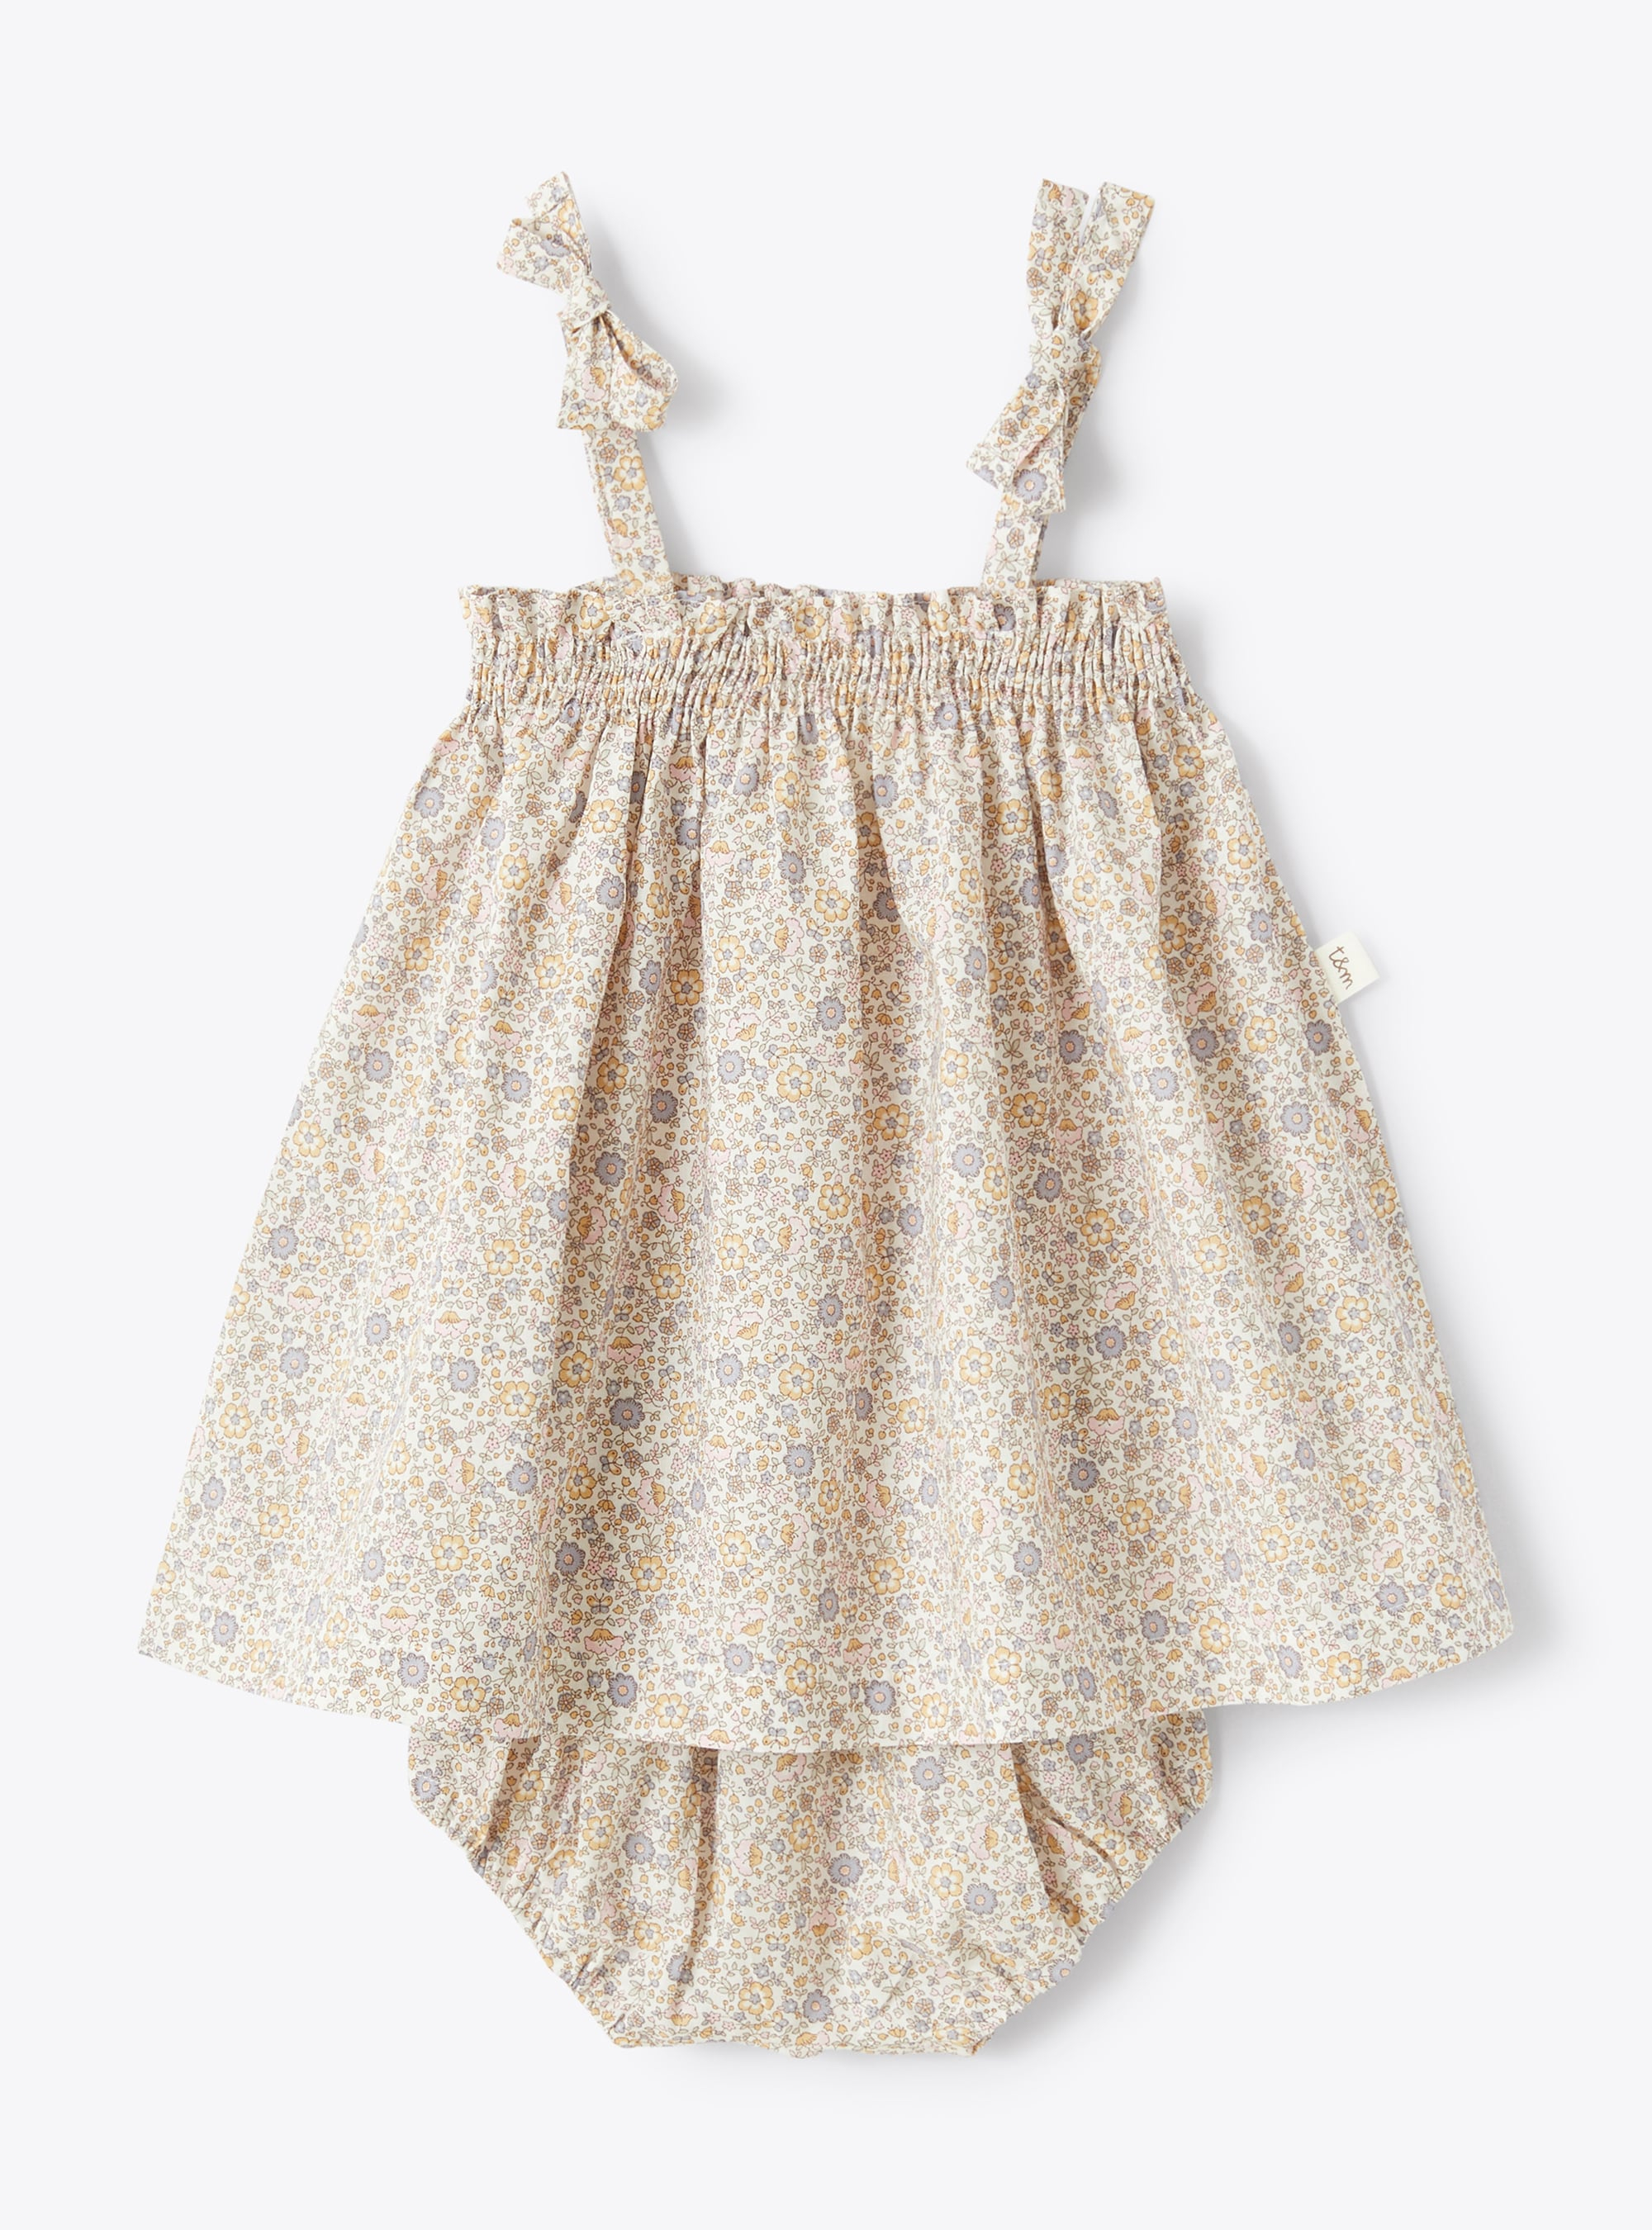 Dress in floral-patterned cotton - Yellow | Il Gufo